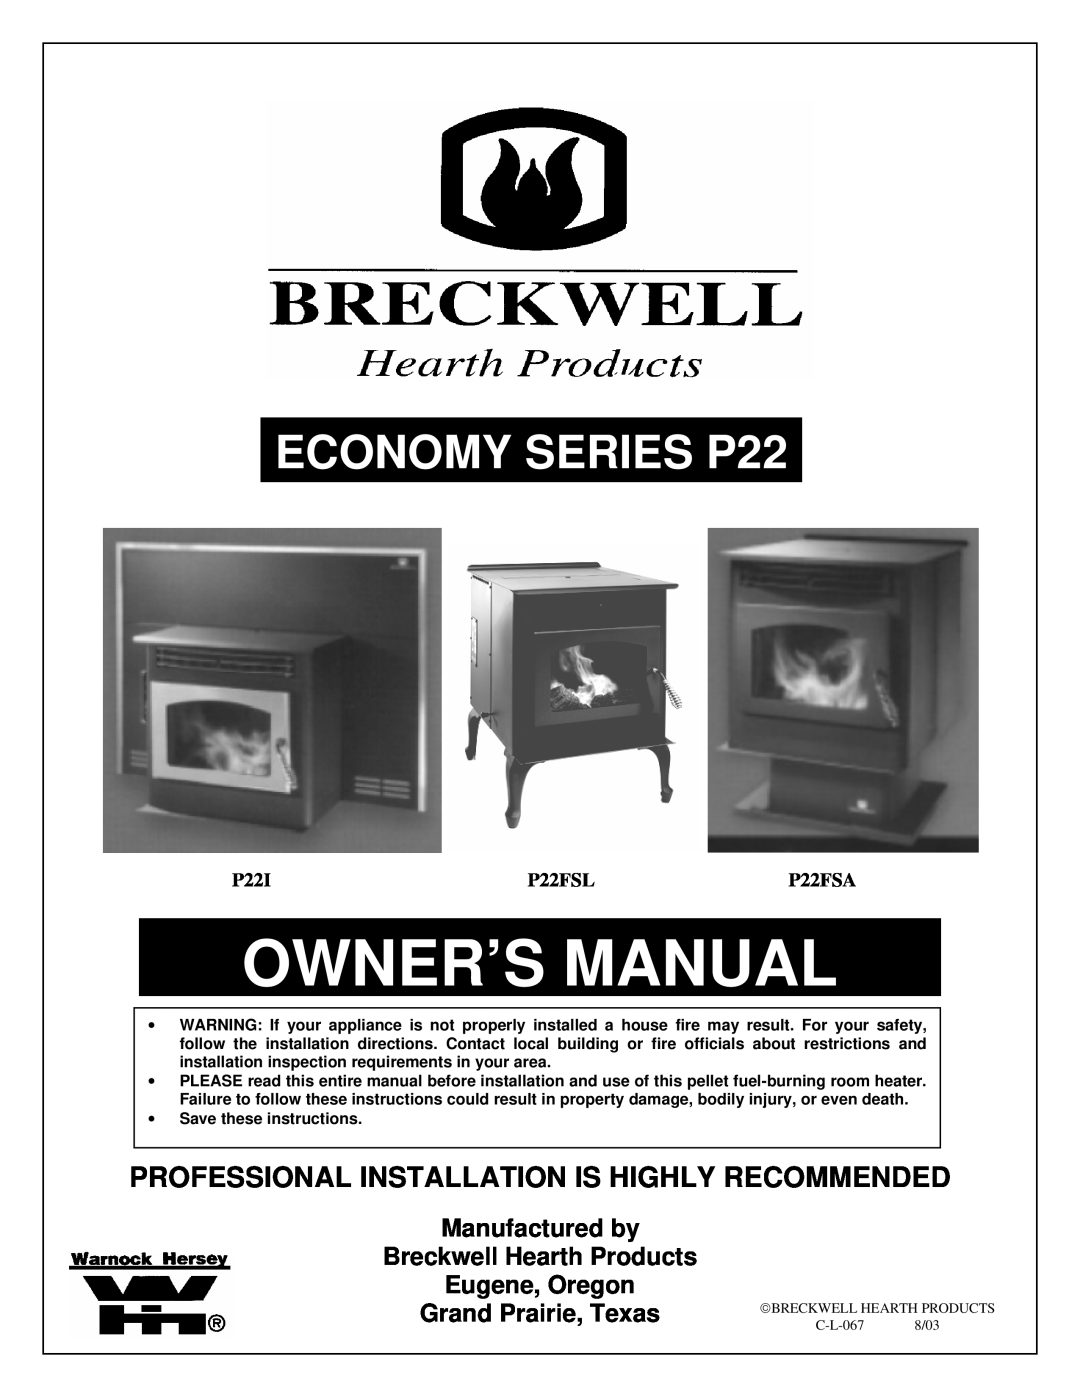 Breckwell P22I owner manual ECONOMY SERIES P22, Professional Installation Is Highly Recommended, P22FSL, P22FSA 